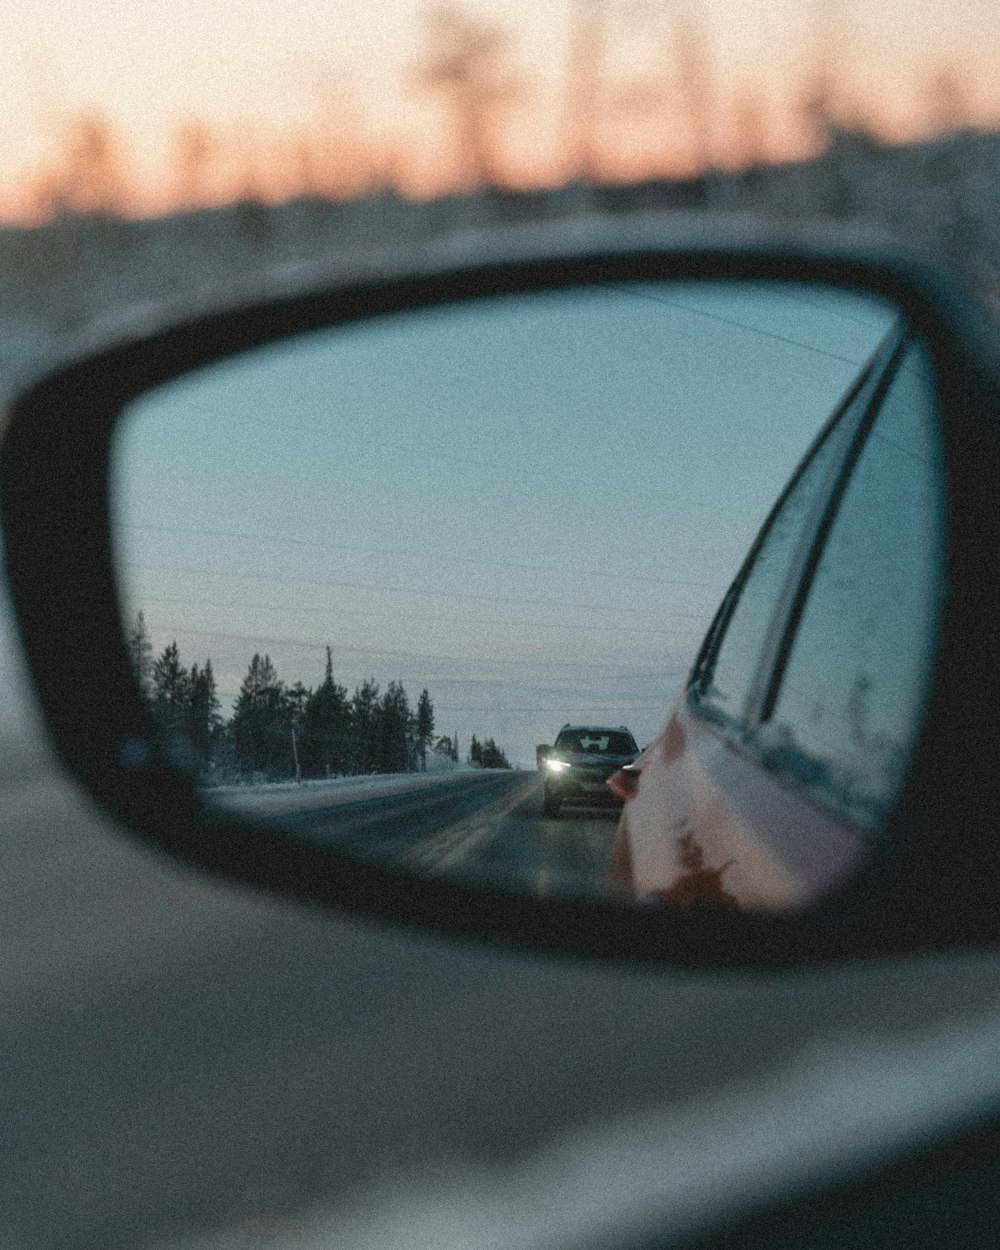 a car's side view mirror reflecting a car driving down the road